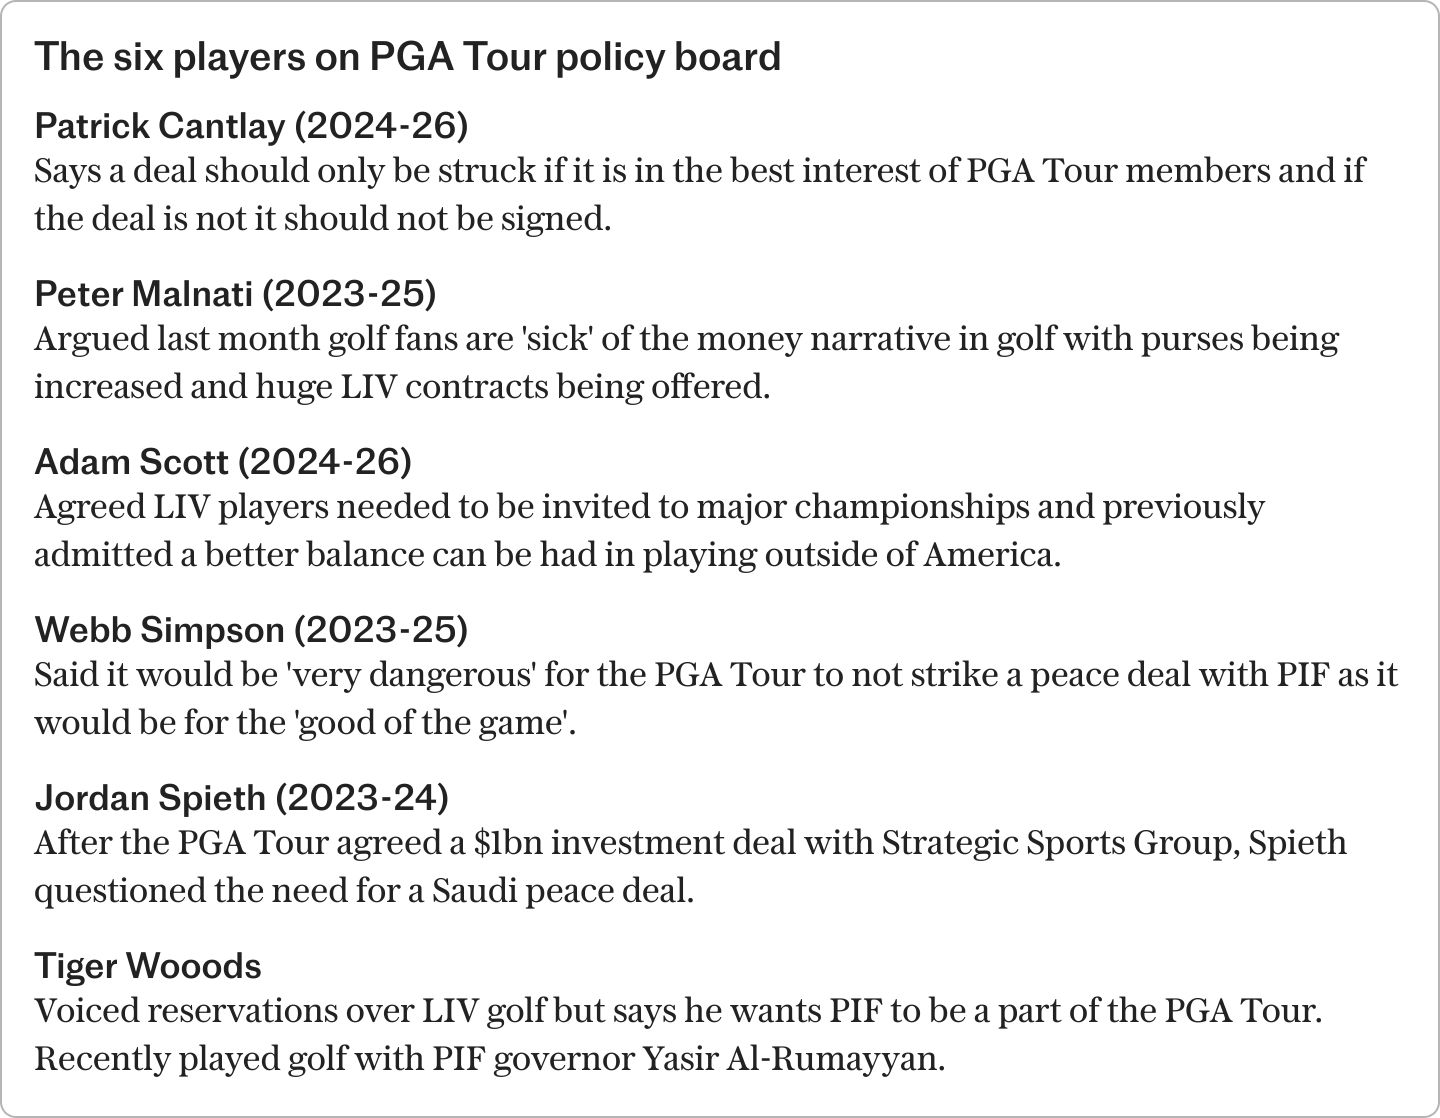 tiger woods votes against rory mcilroy returning to pga tour board for liv peace talks